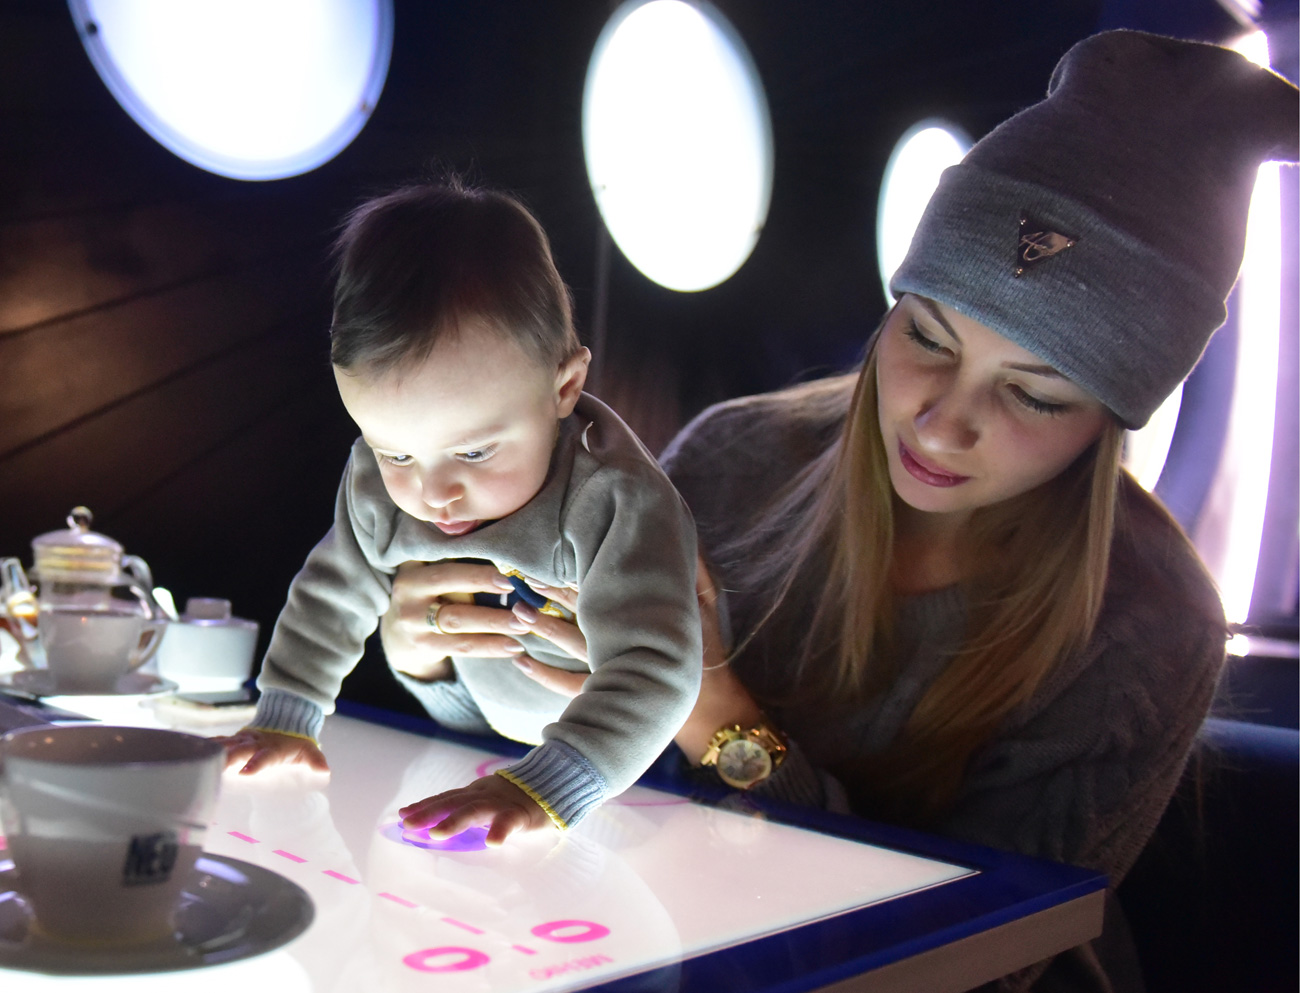 VLADIKAVKAZ, RUSSIA  A woman and a baby at the NEO interactive restaurant. The restaurant is equipped with interactive tables where people can view a list of dish ingredients, place an order or play games while waiting for meal. 